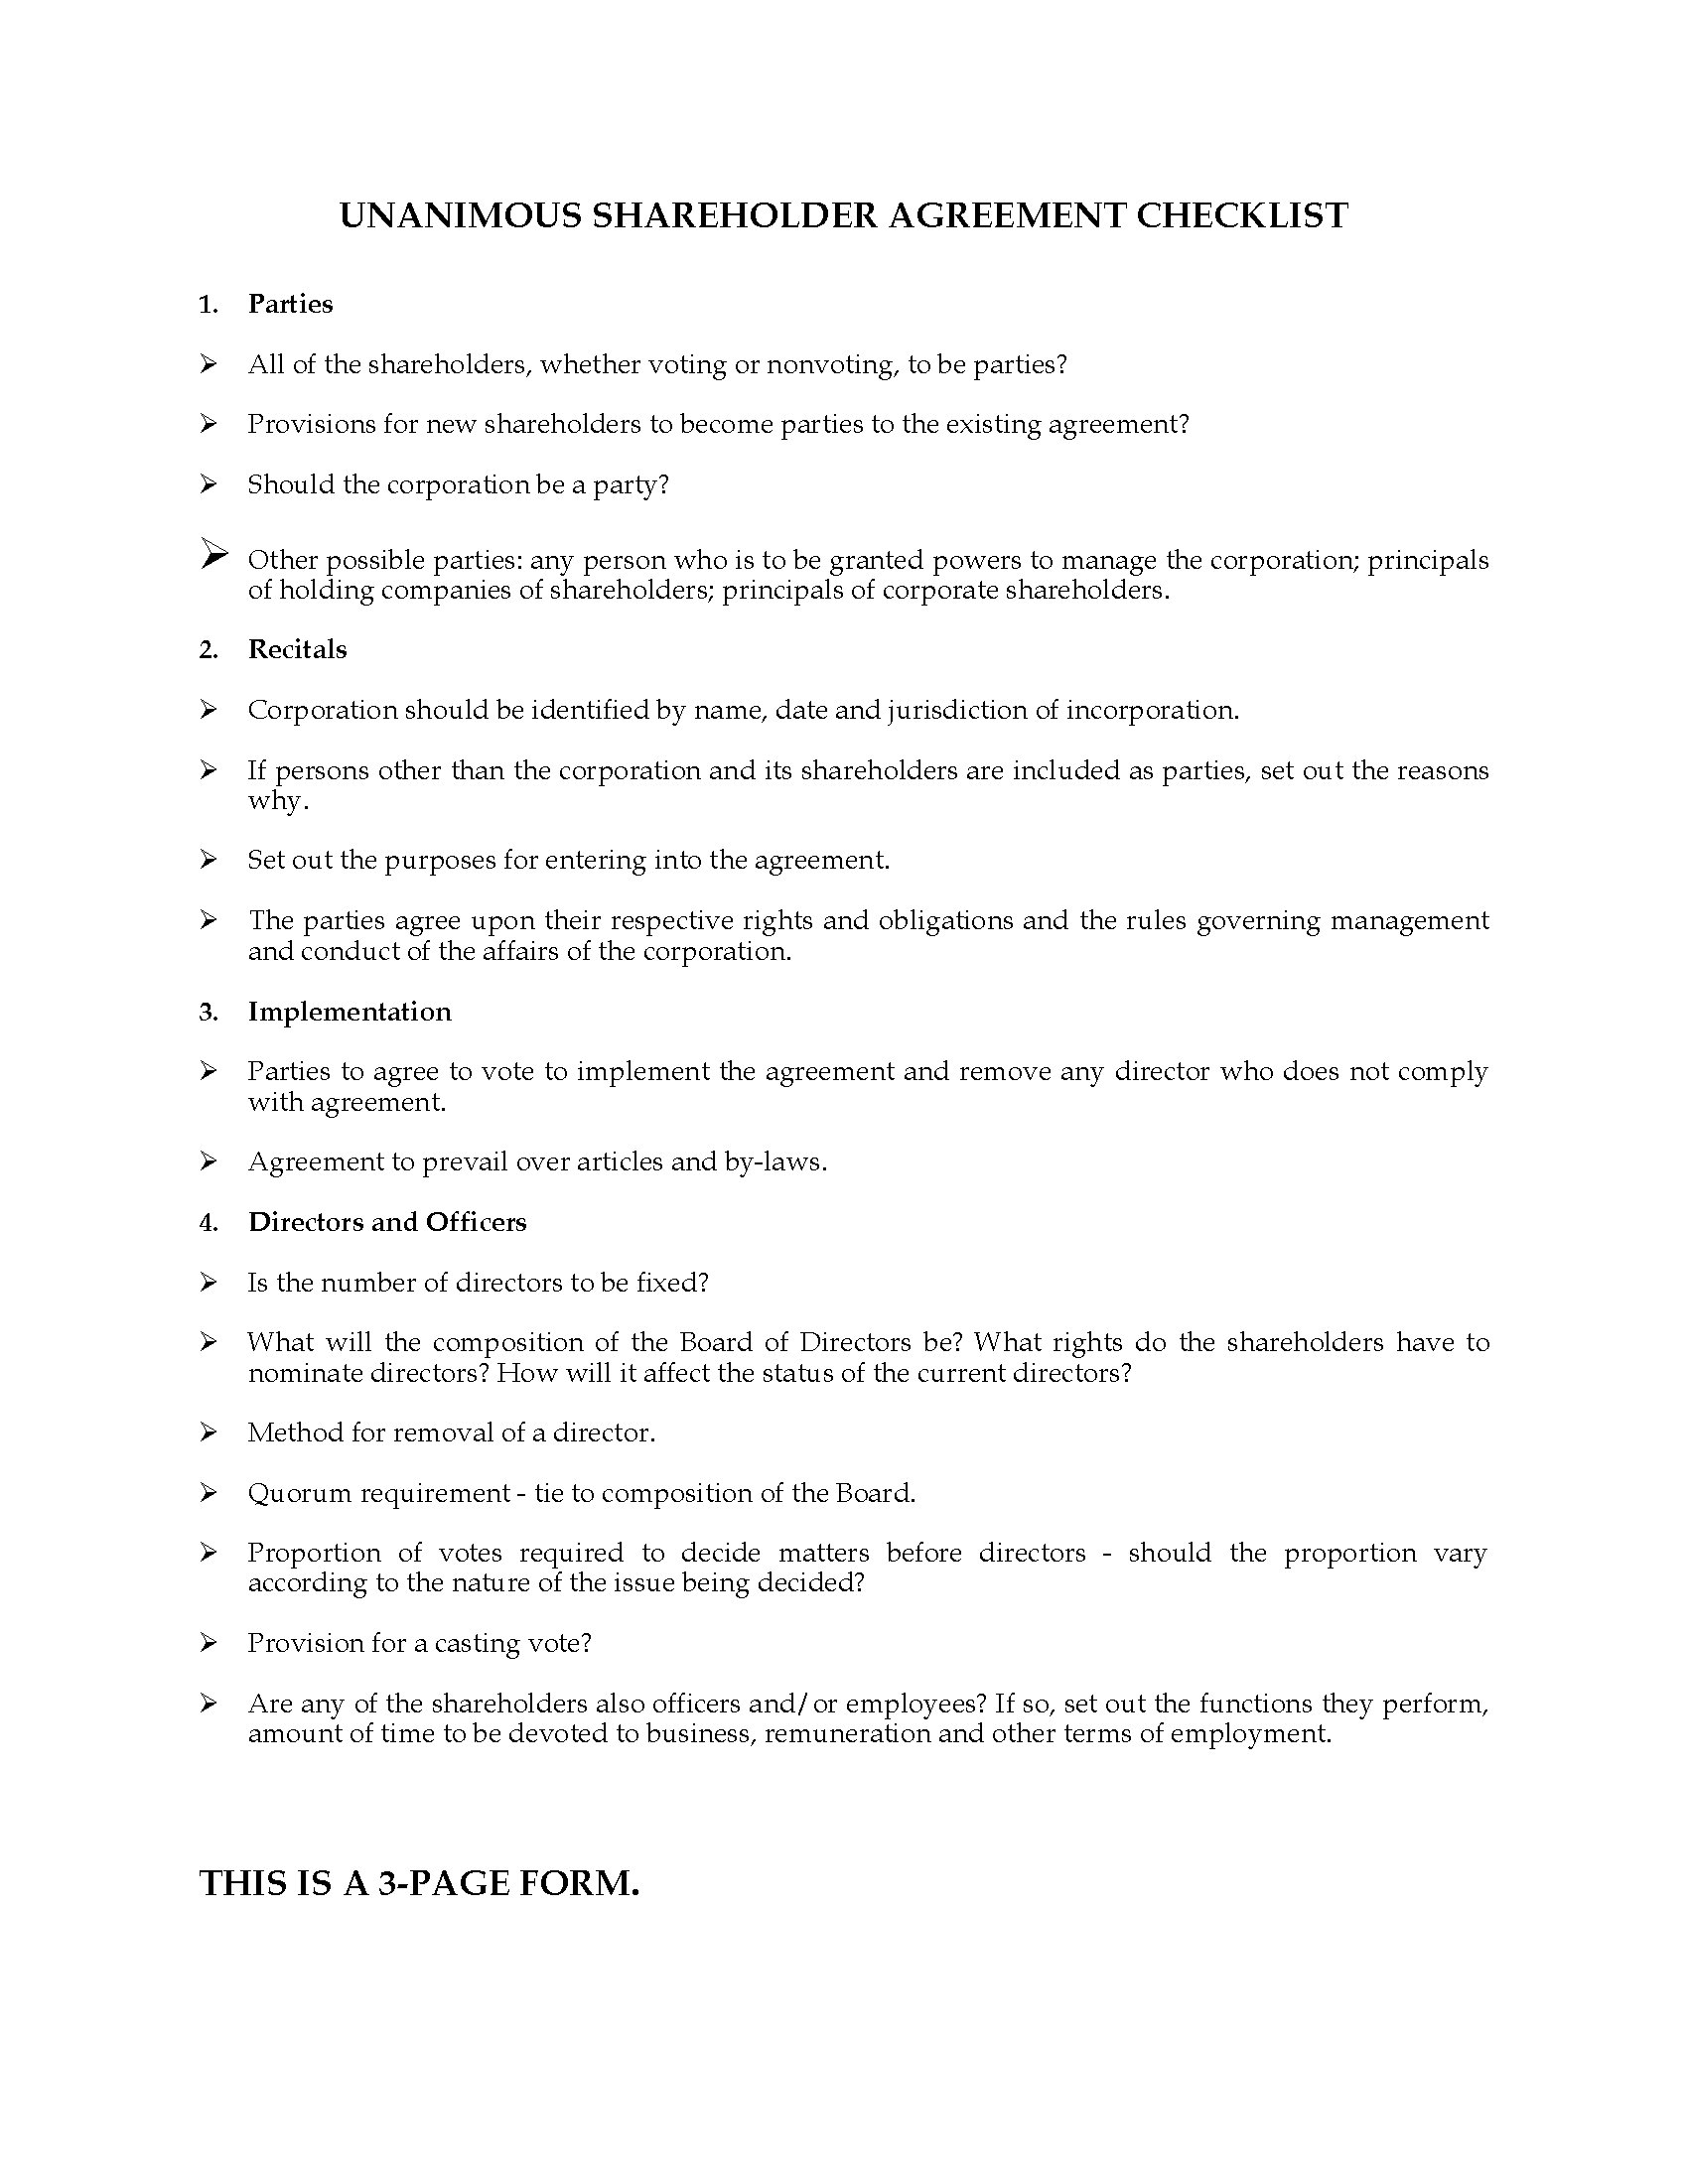 Canada Unanimous Shareholder Agreement Checklist  Legal Forms and Throughout unanimous shareholder agreement template